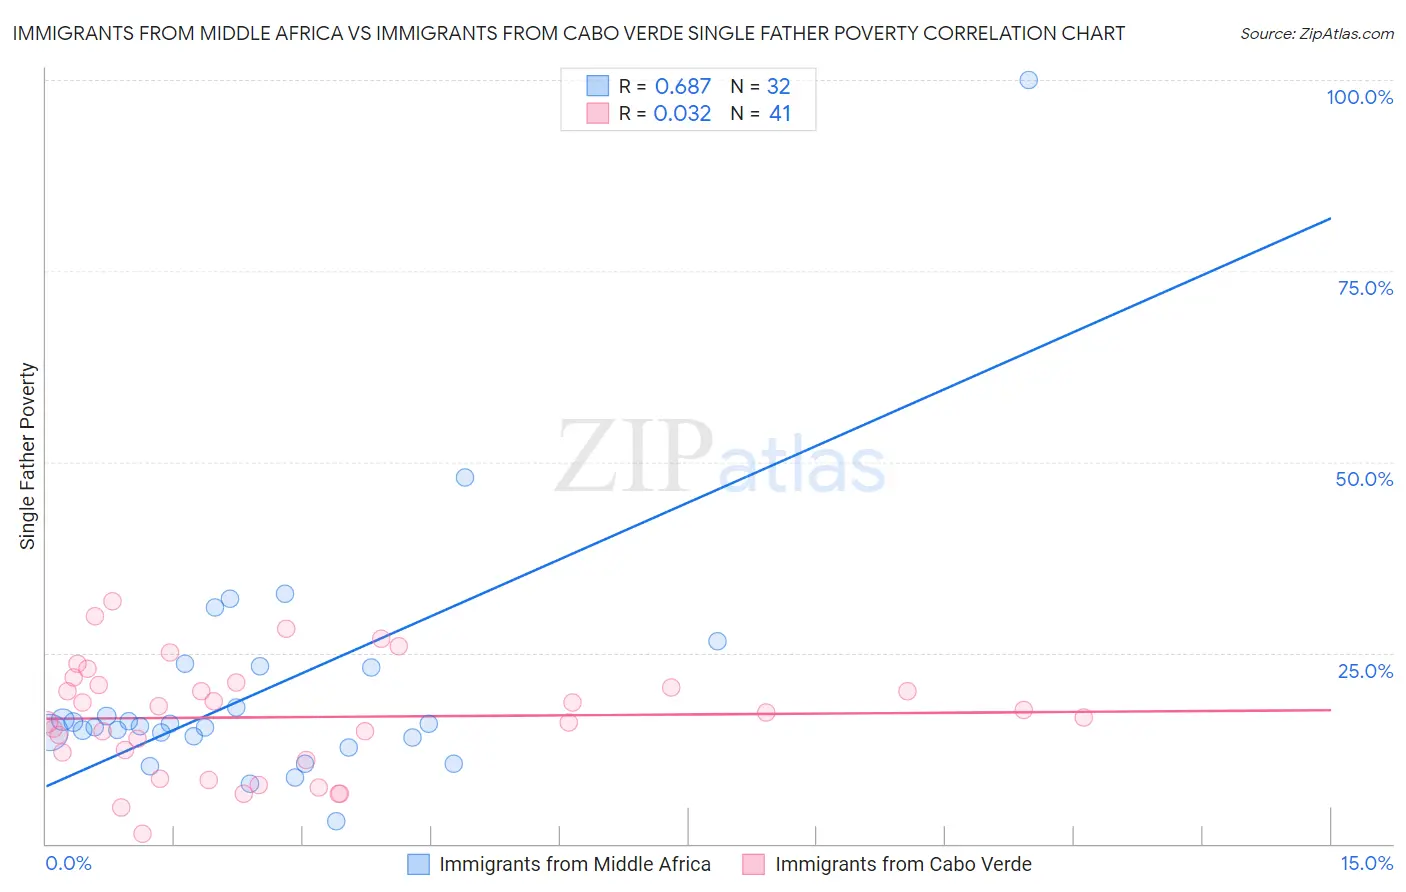 Immigrants from Middle Africa vs Immigrants from Cabo Verde Single Father Poverty